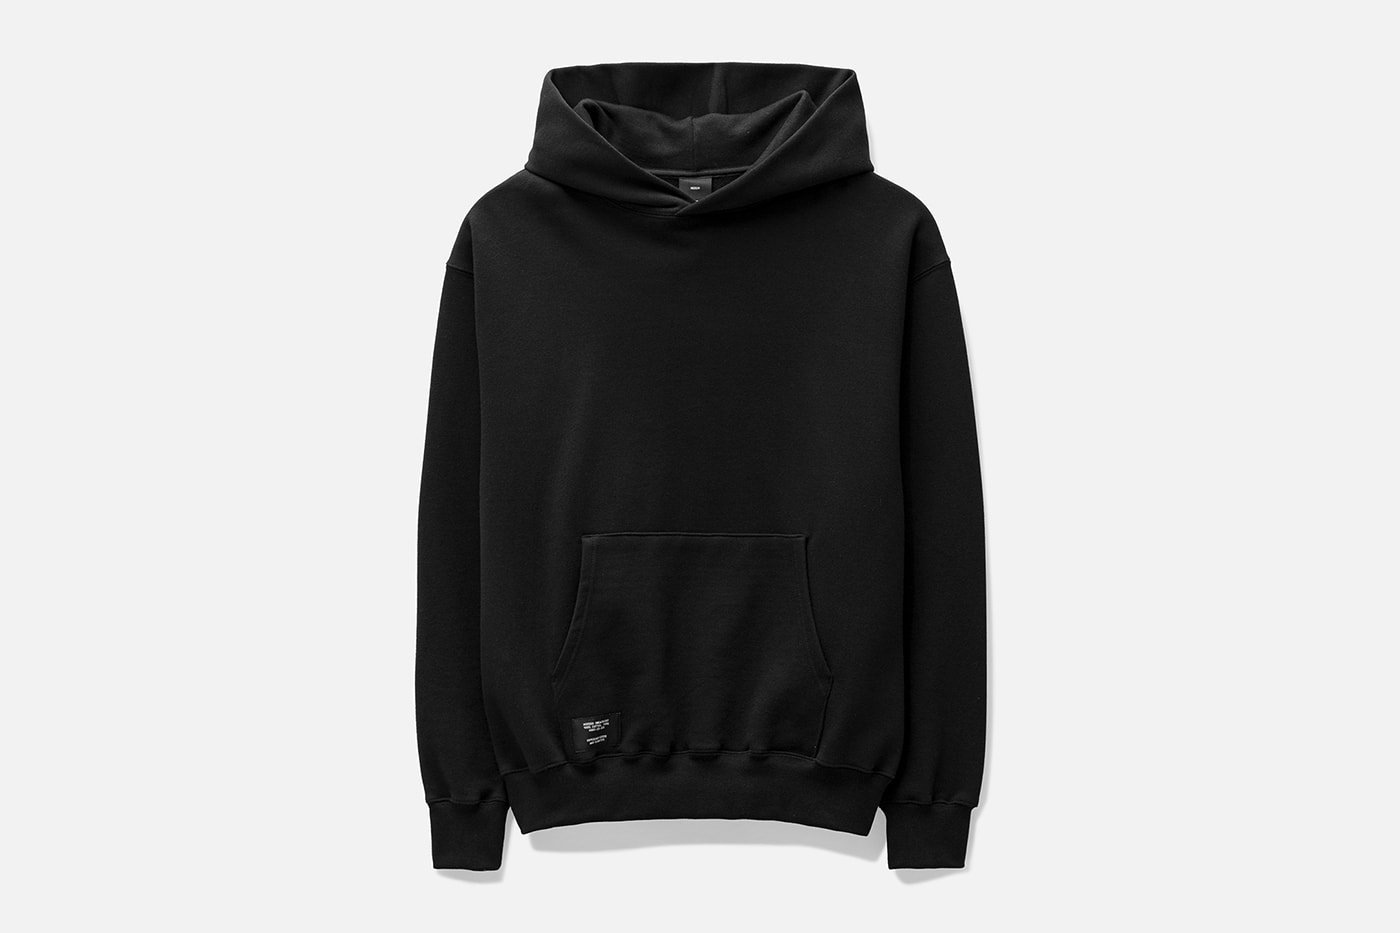 Hypebeast Goods and Services 首波系列正式登场